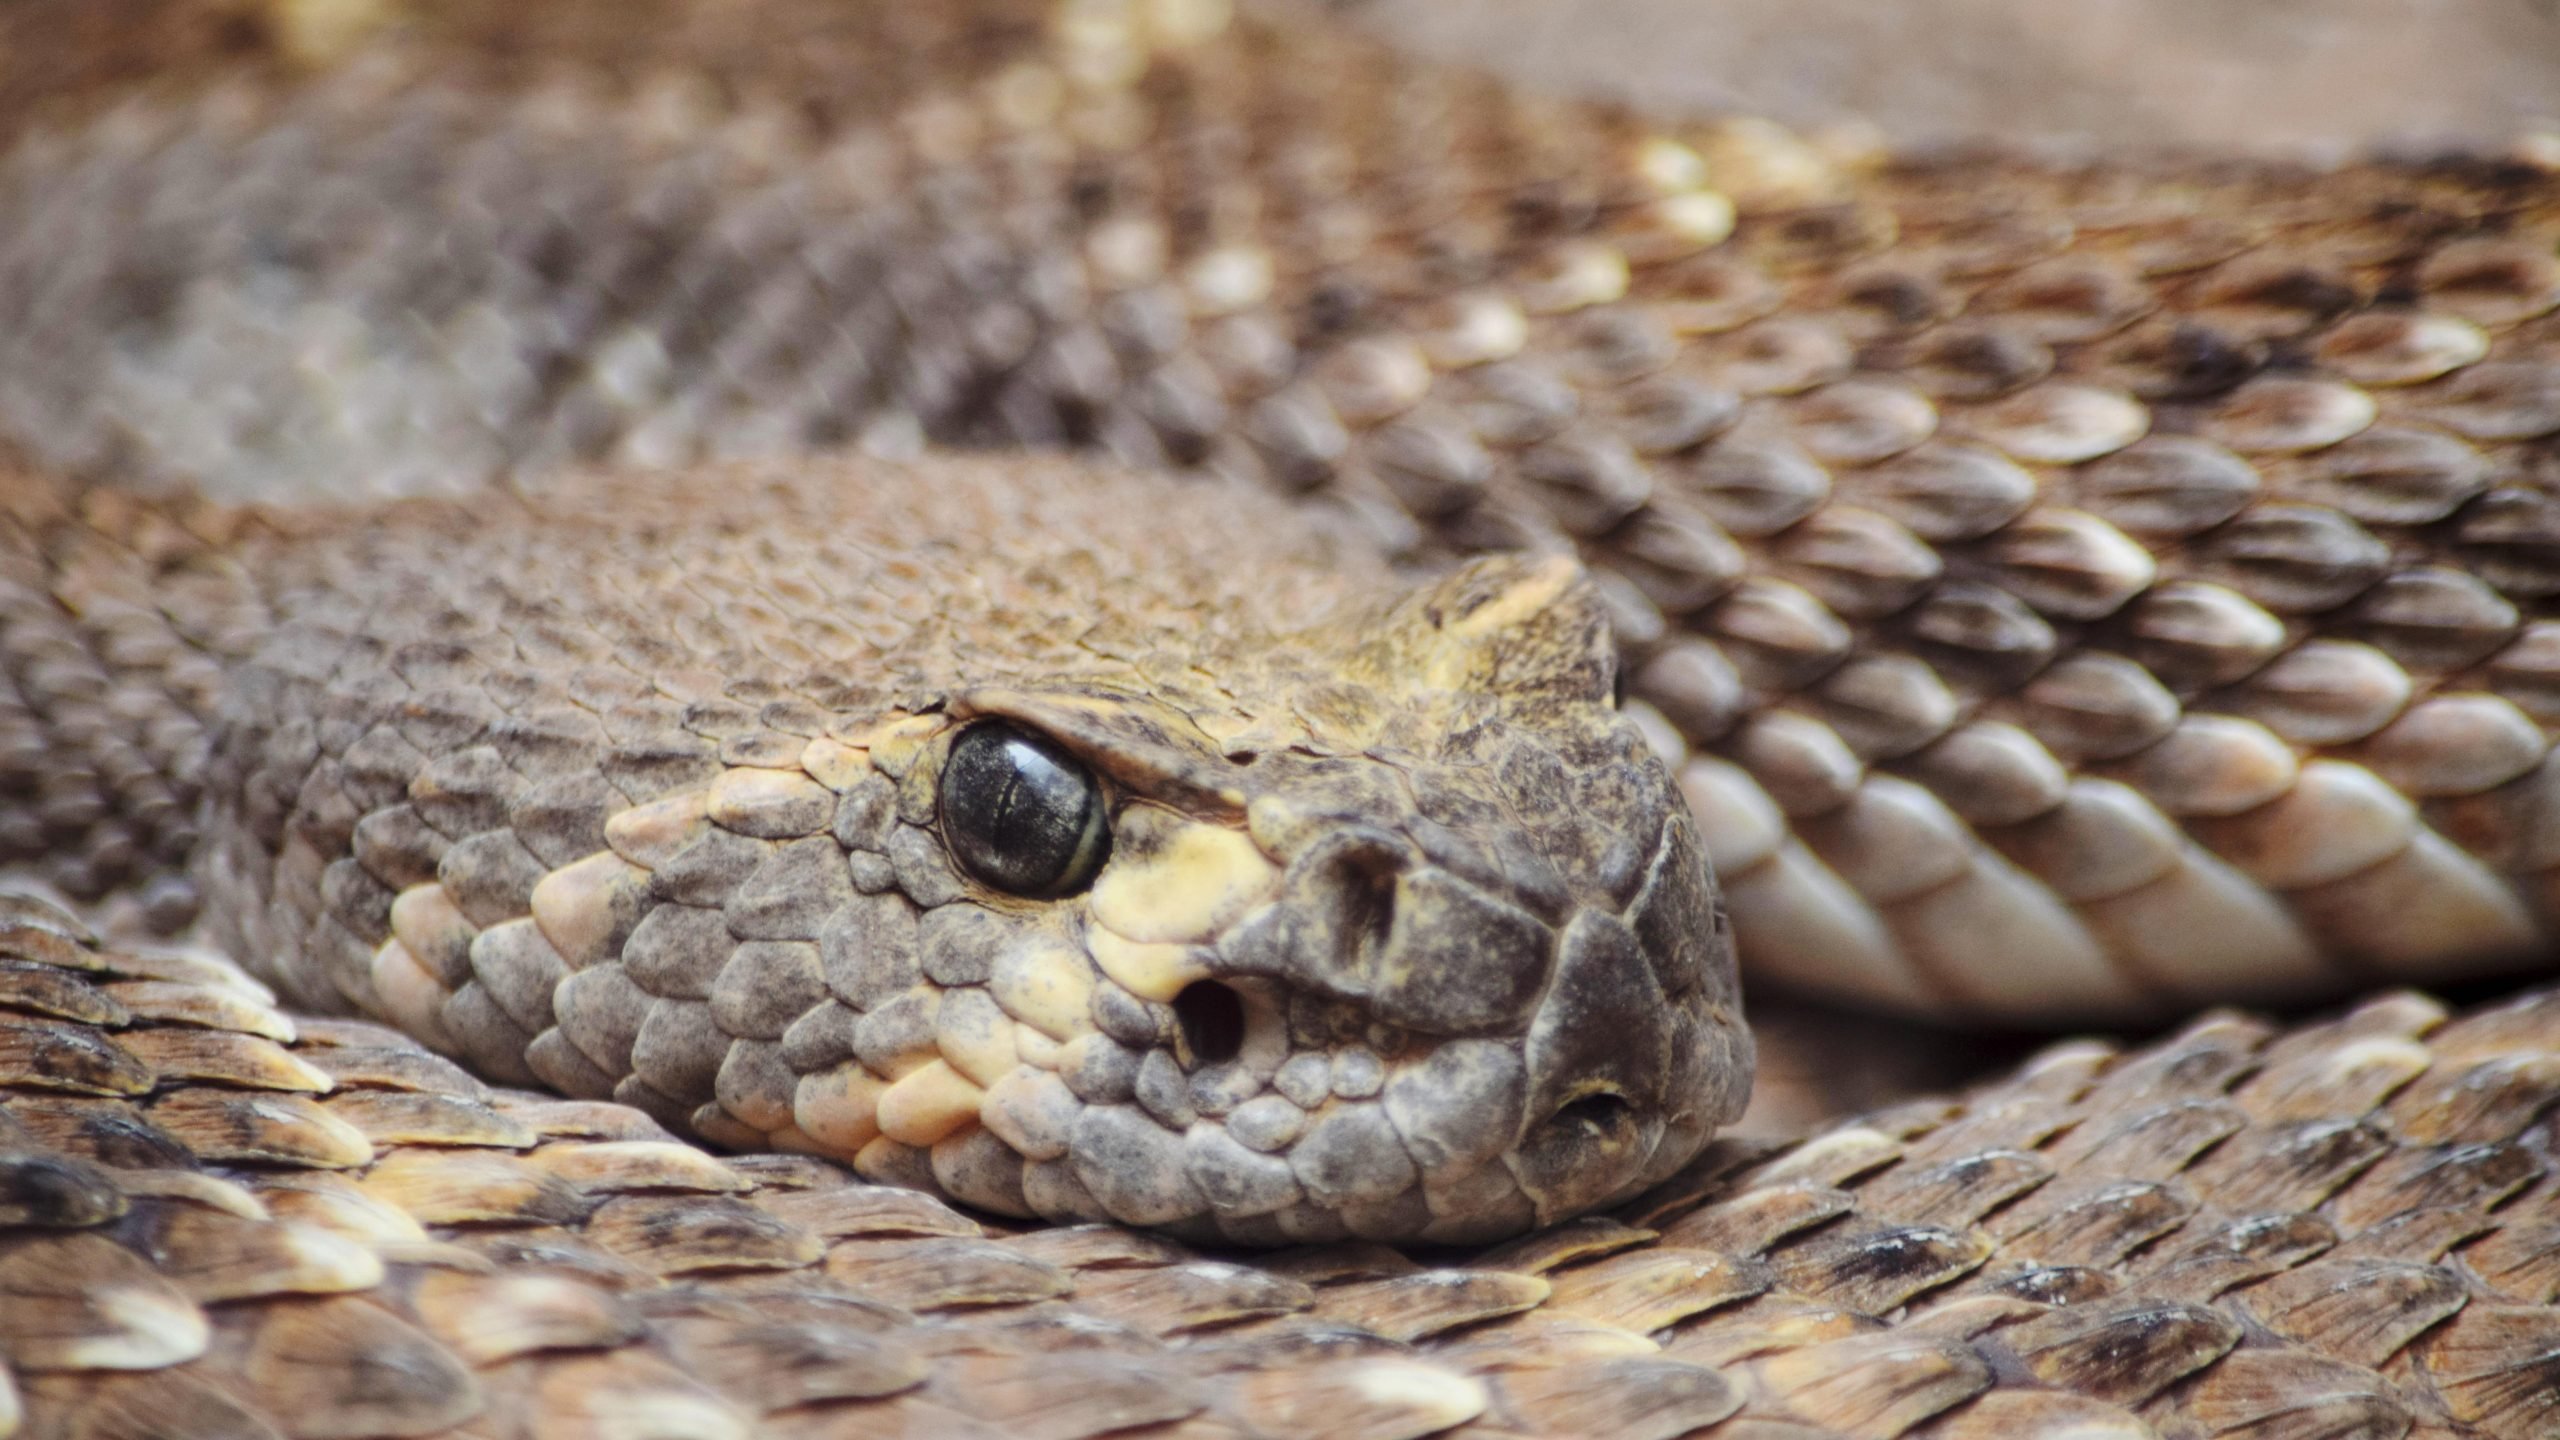 Scientists set up cameras in a 2000-strong rattlesnake pit